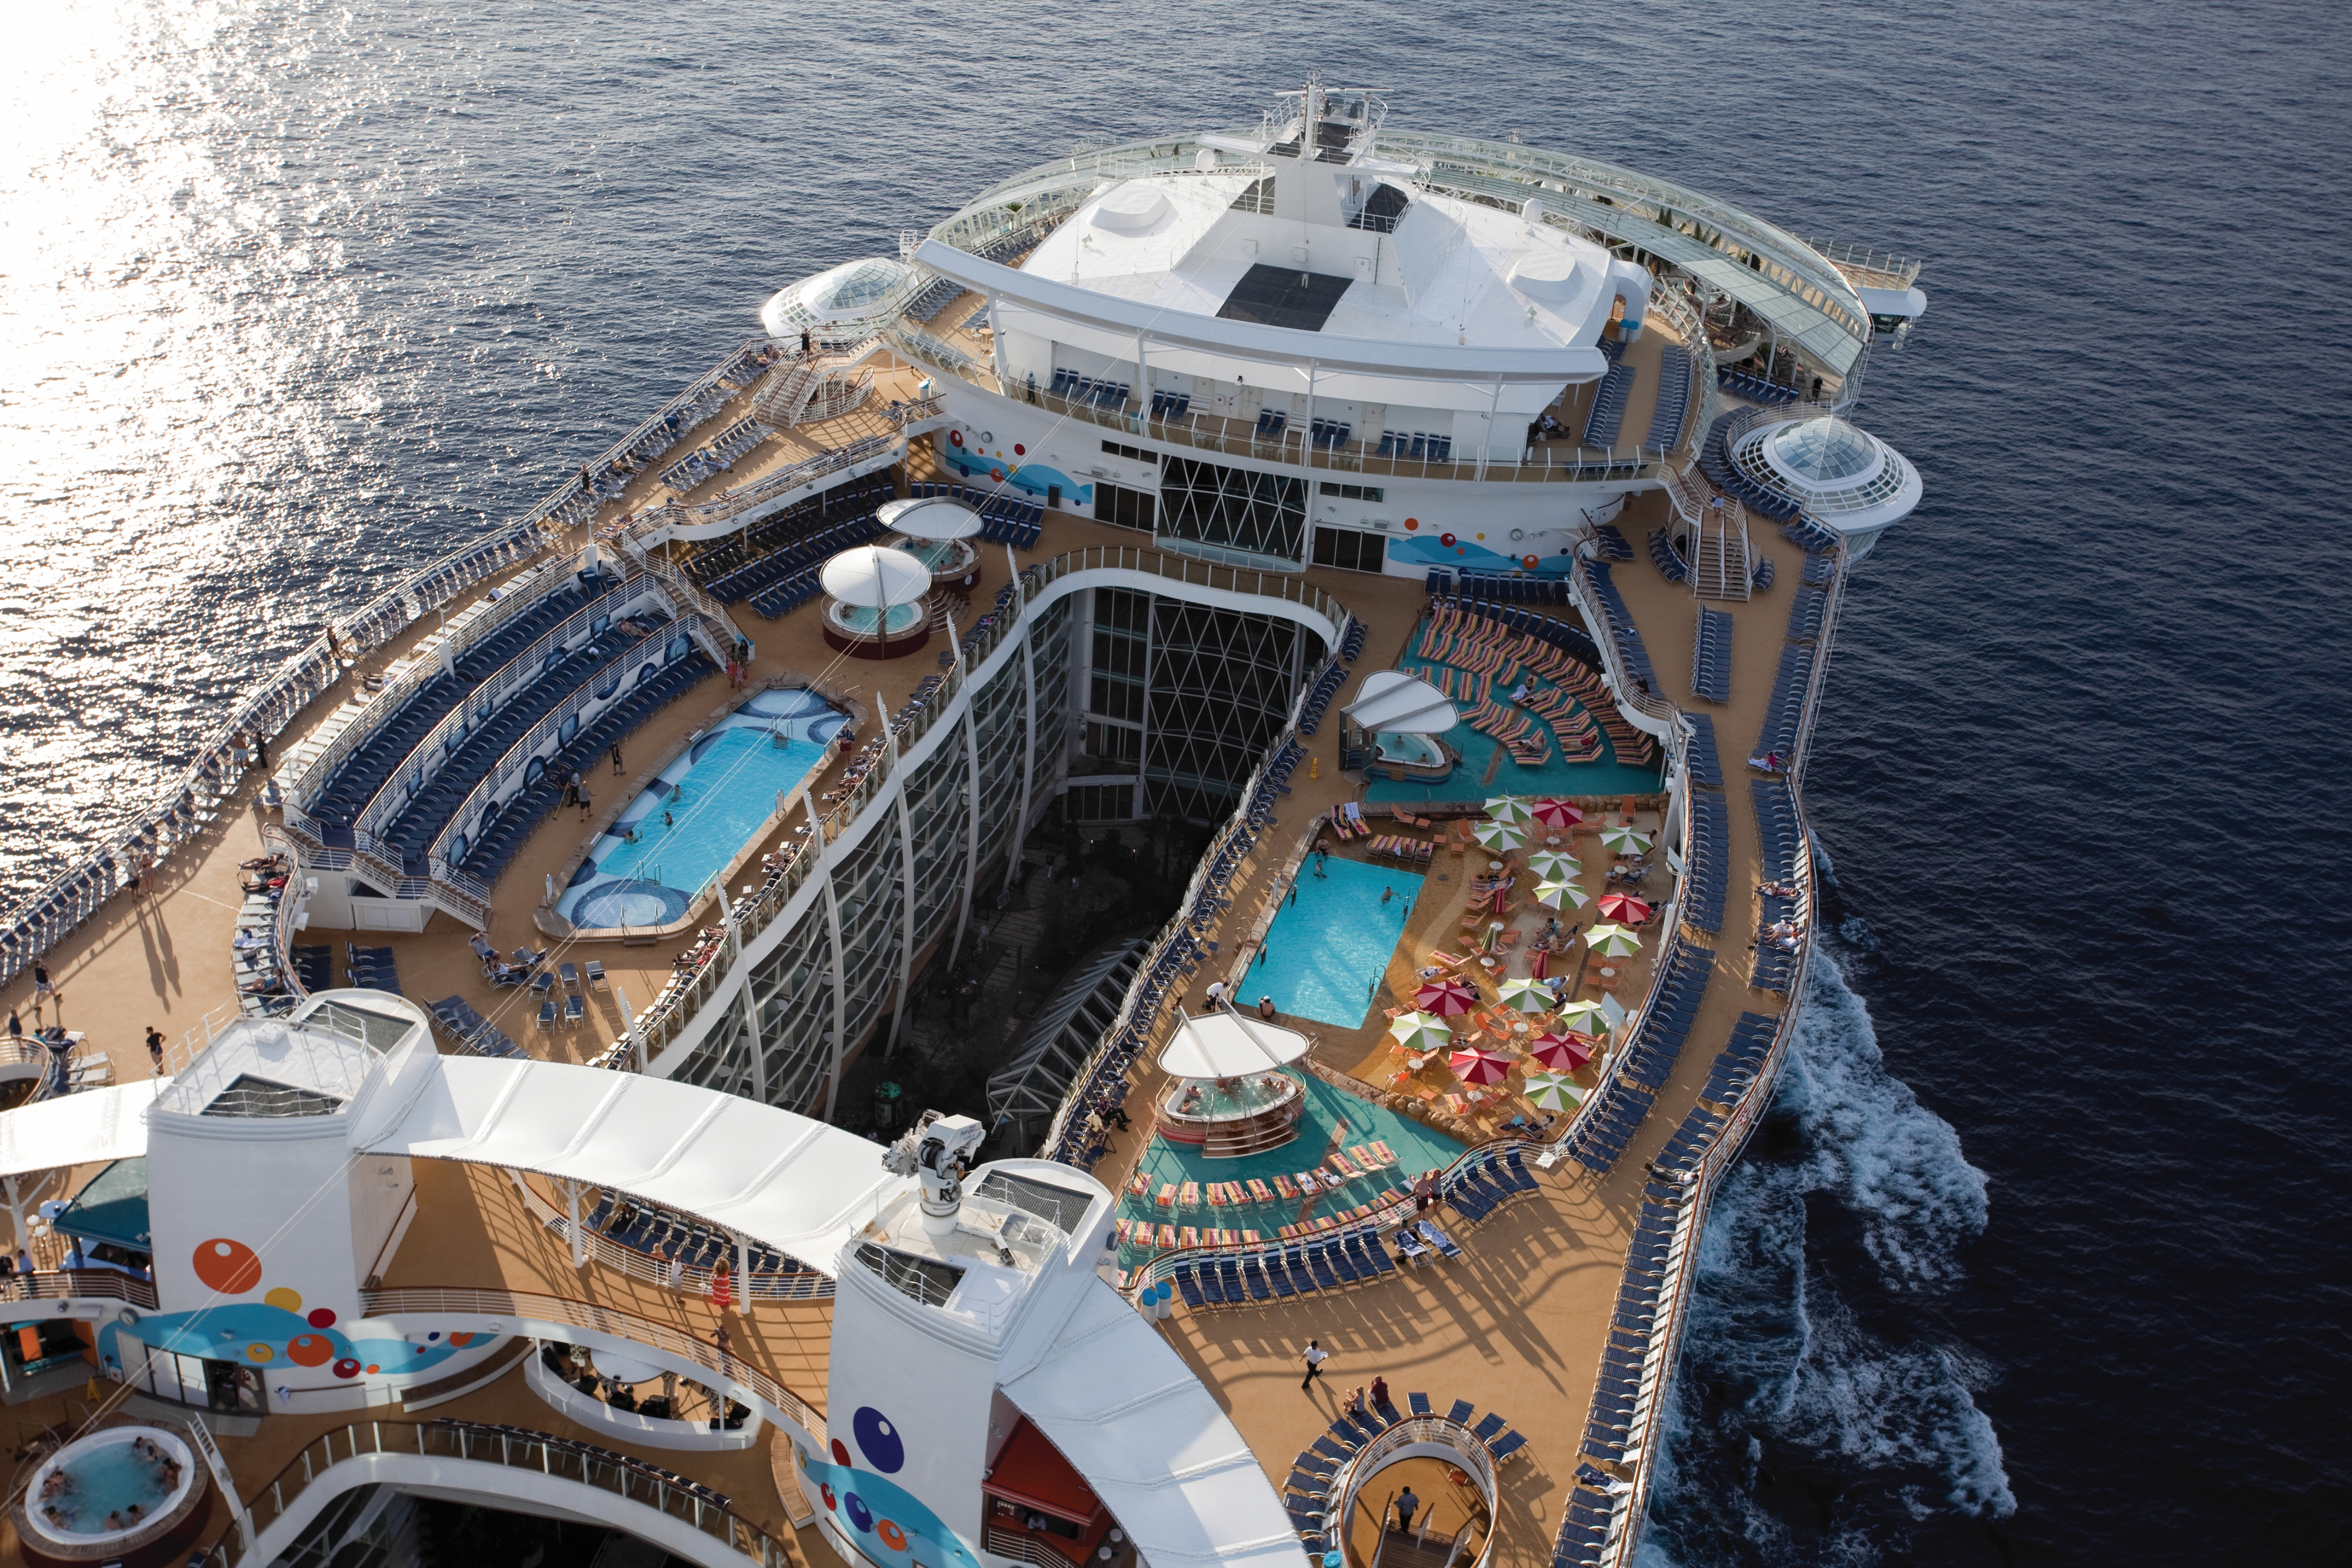 An aesthetic aerial photo of a cruise ship's deck as it travels across the ocean.